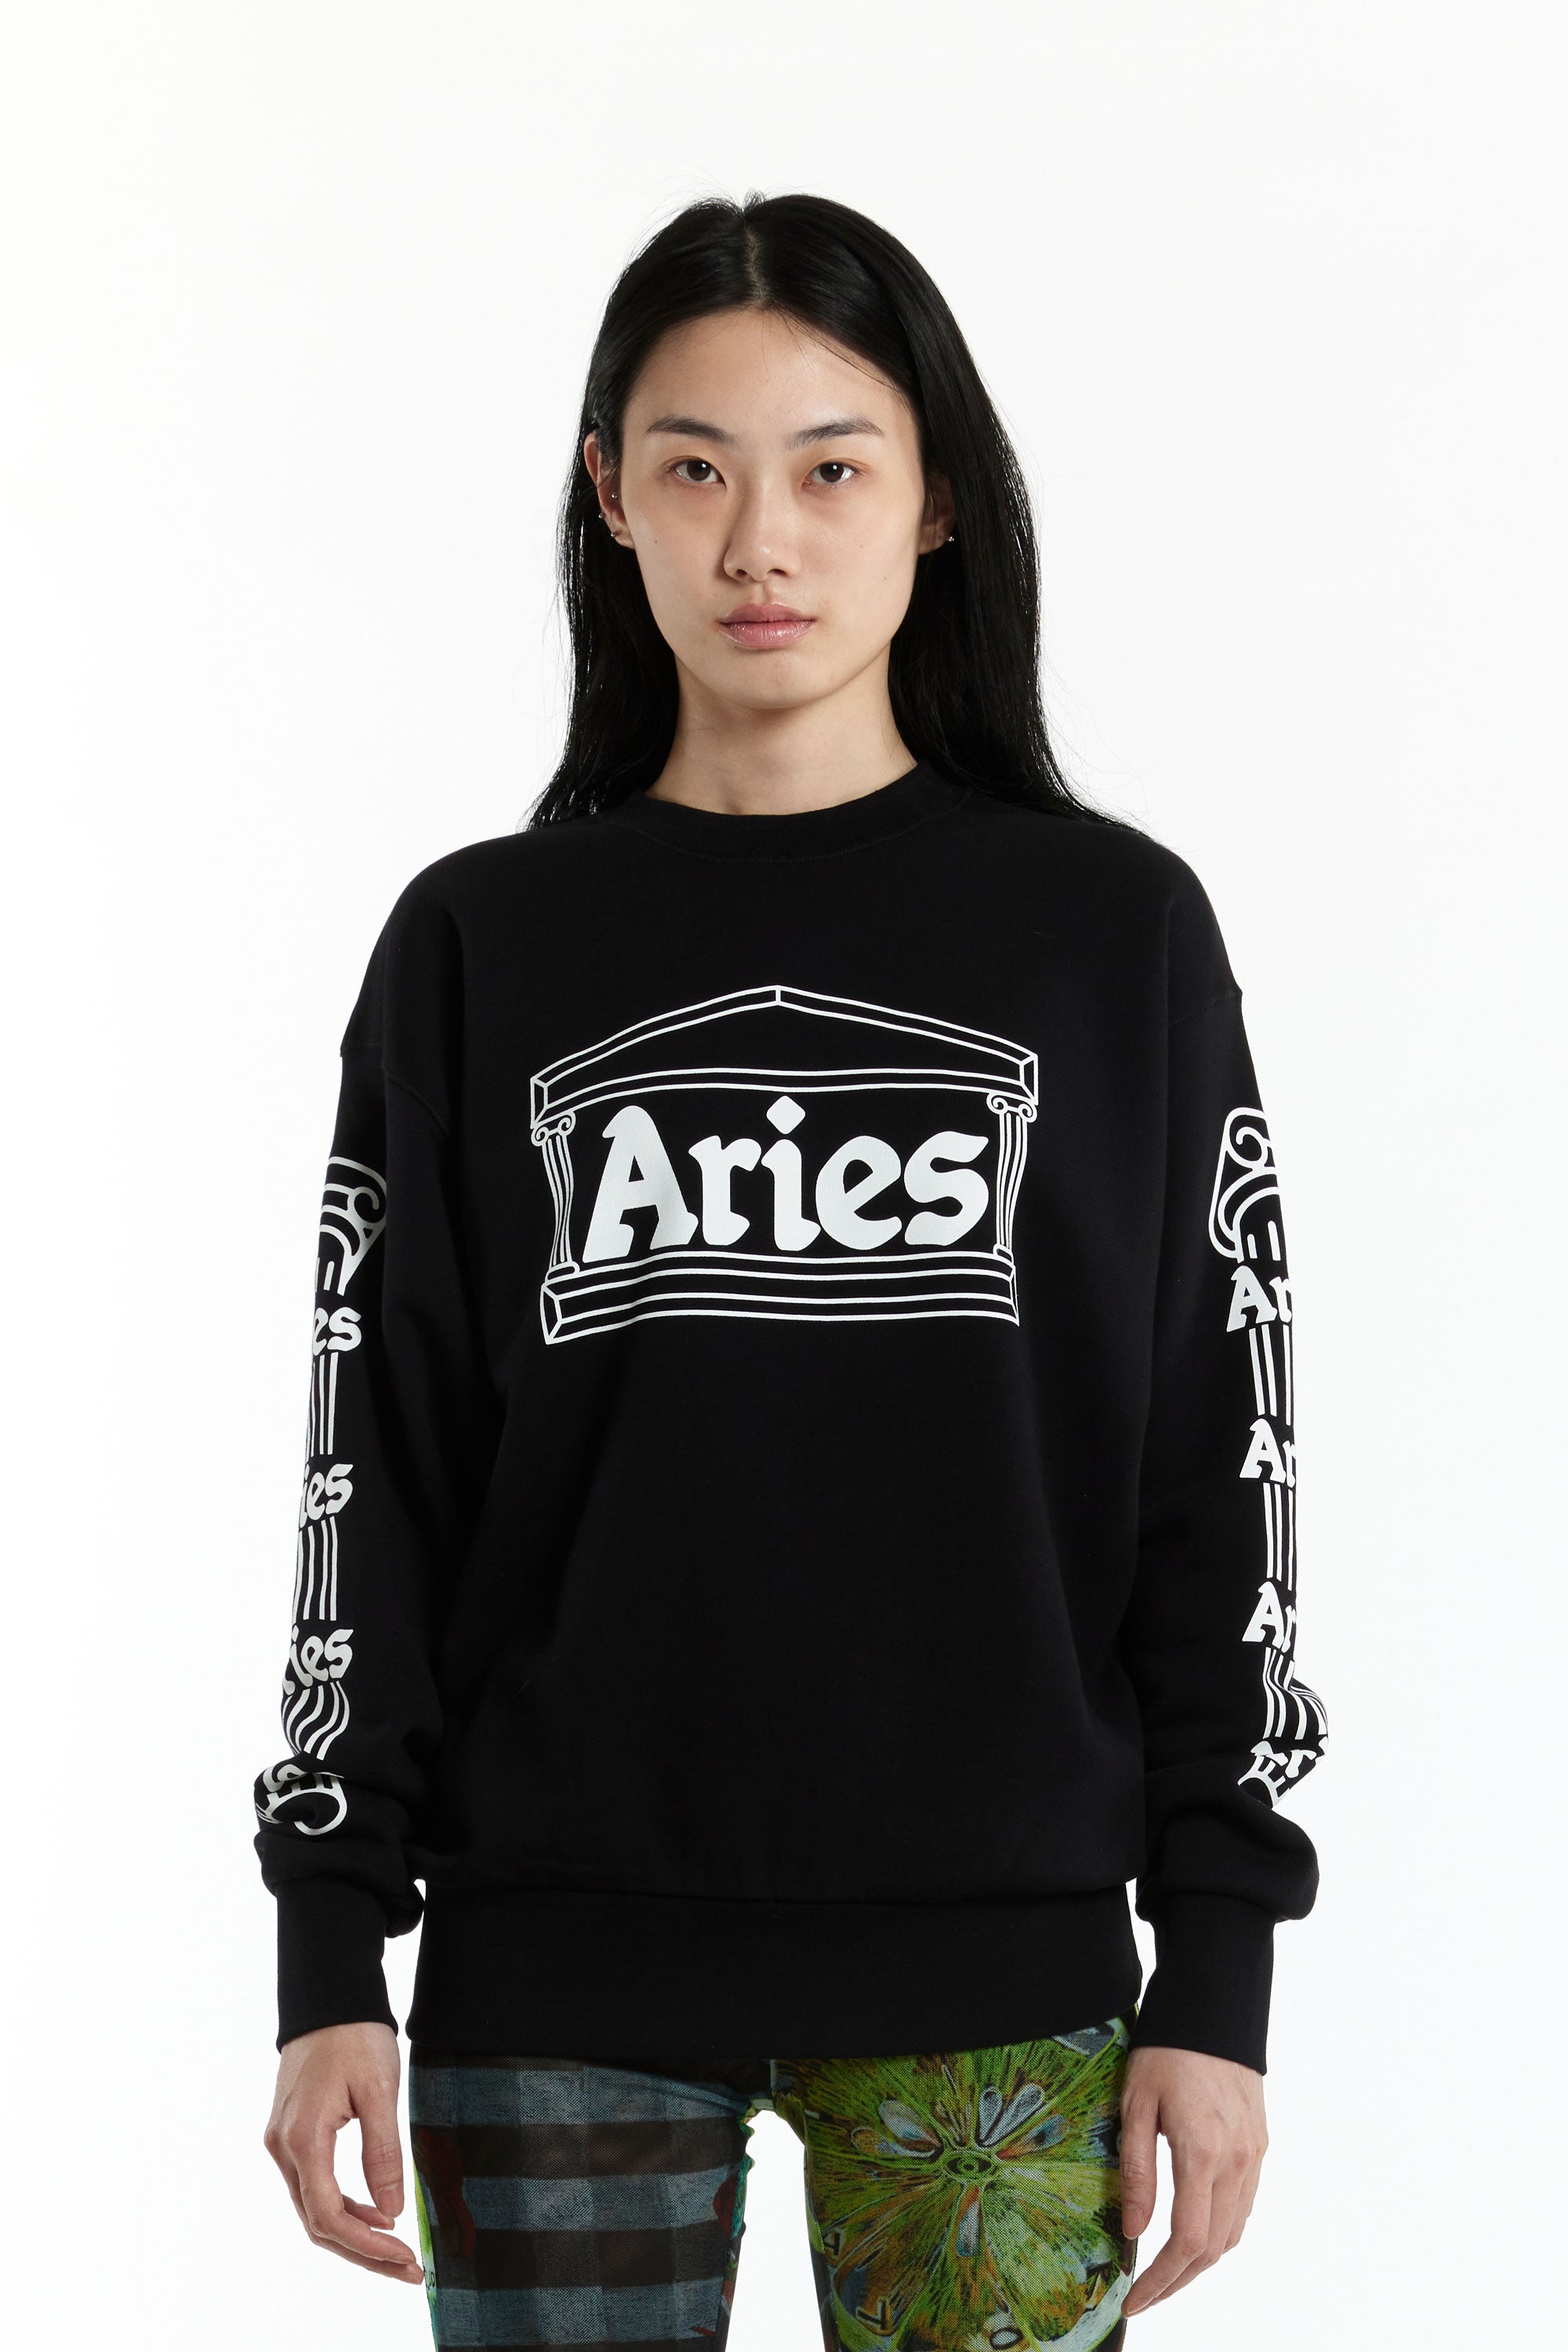 Aries Clothing  Shop Aries Clothing Online At Perks & Mini – P.A.M. (Perks  And Mini)